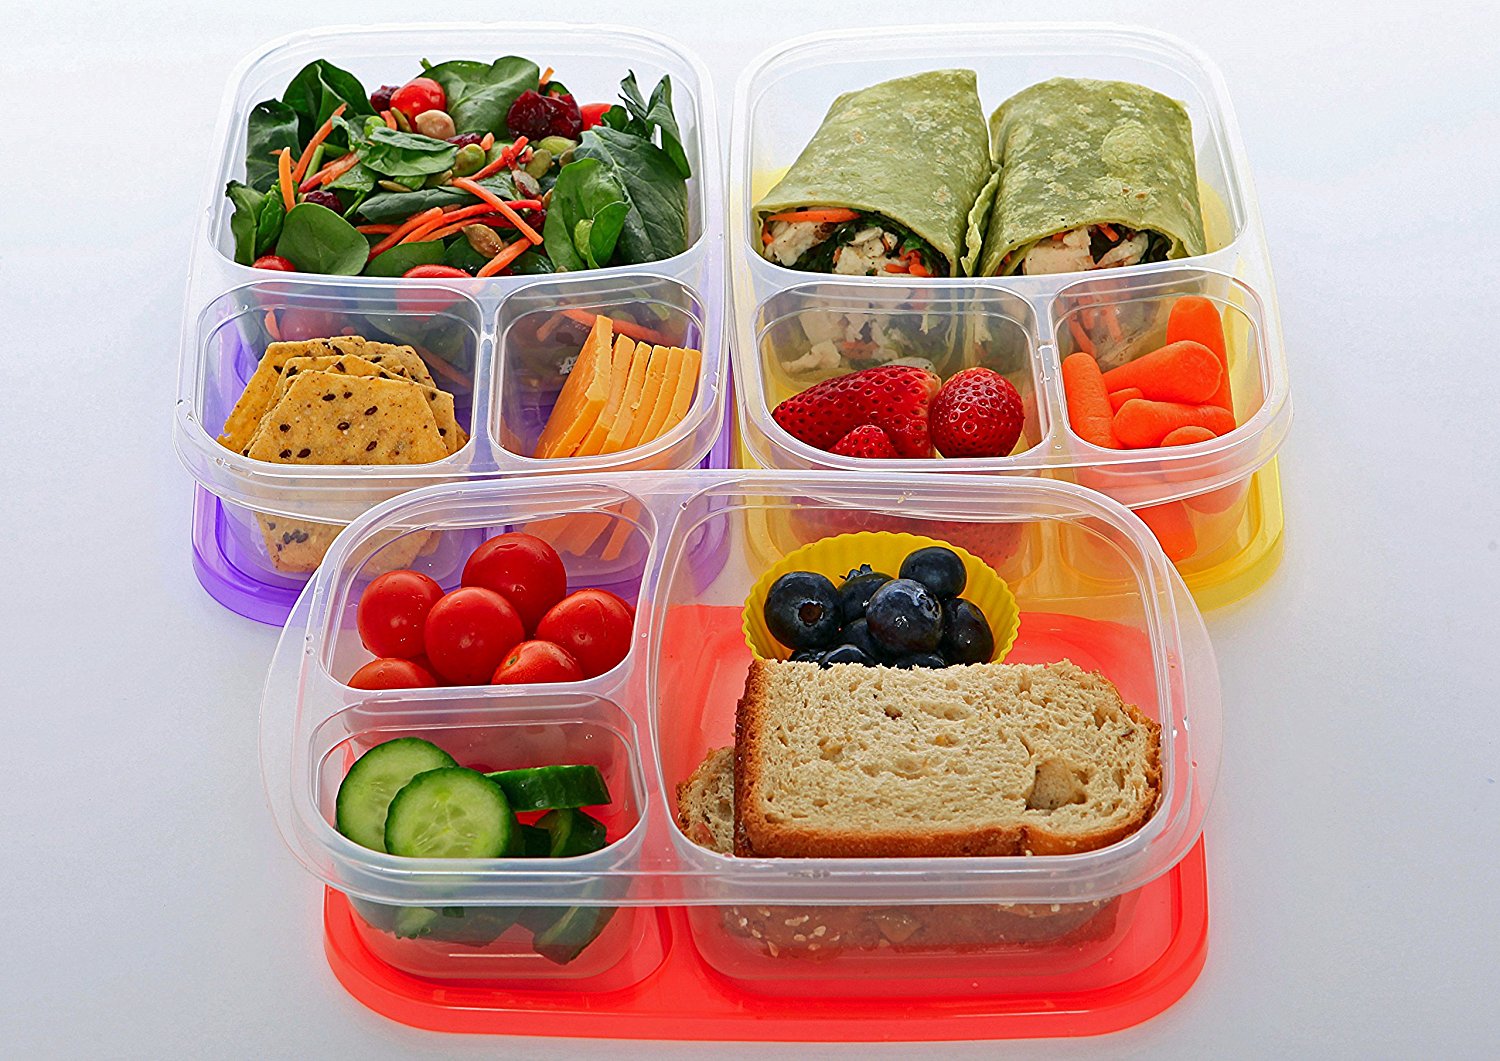 Set of 5 Bento Lunch Boxes Only $9.99! Best Price! - Become a Coupon Queen